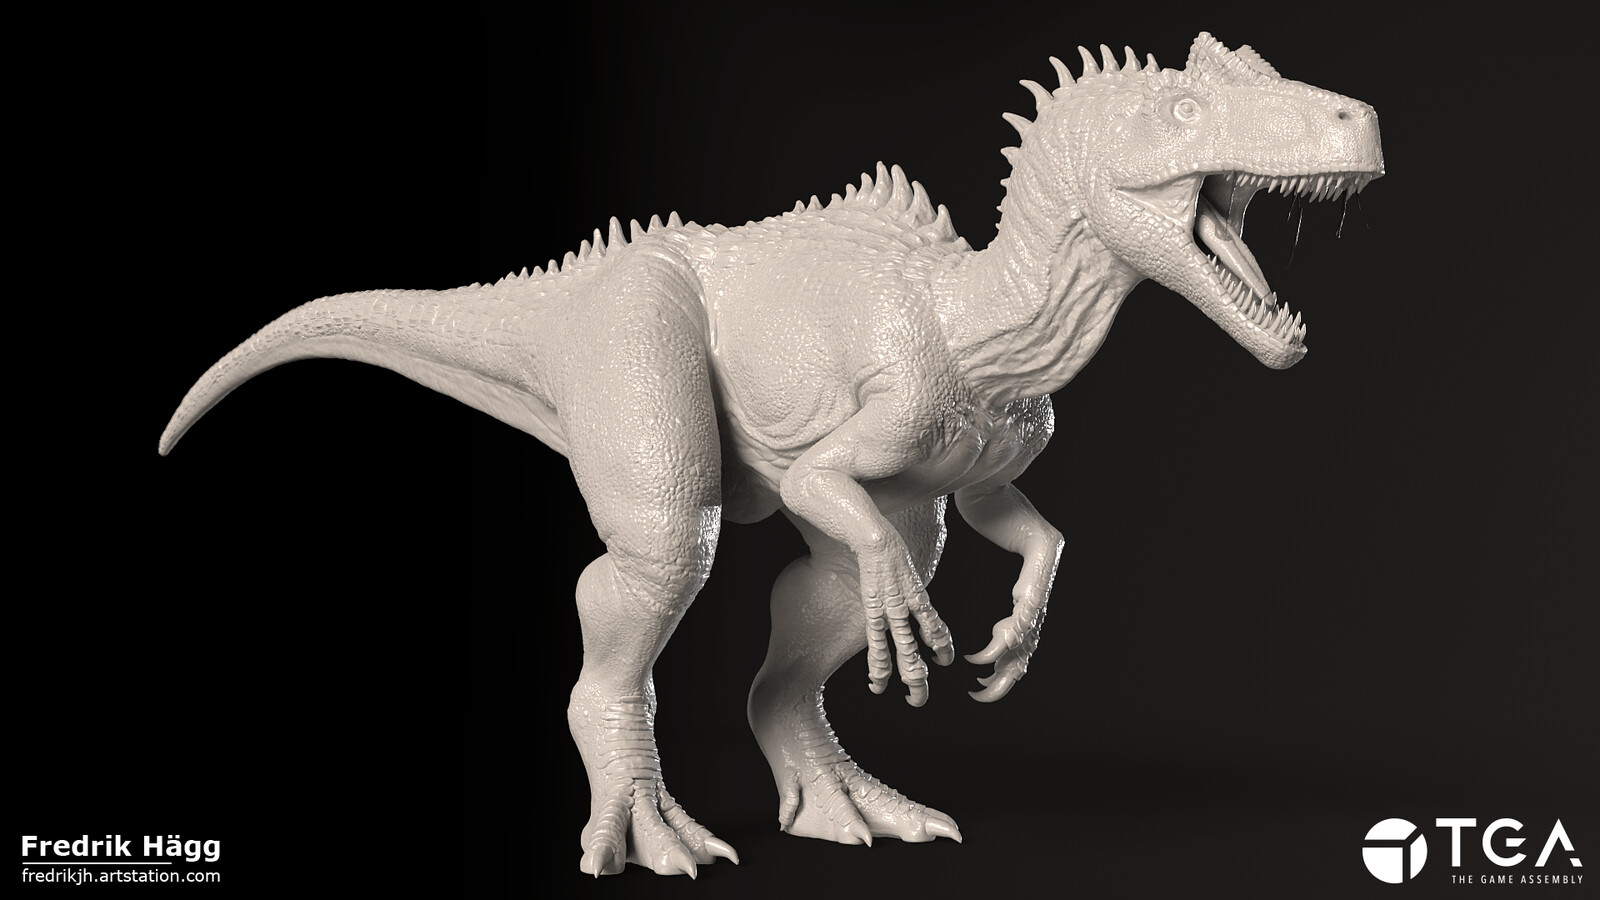 The Allosaurus was sculpted over the course of 40 work hours using ZBrush.